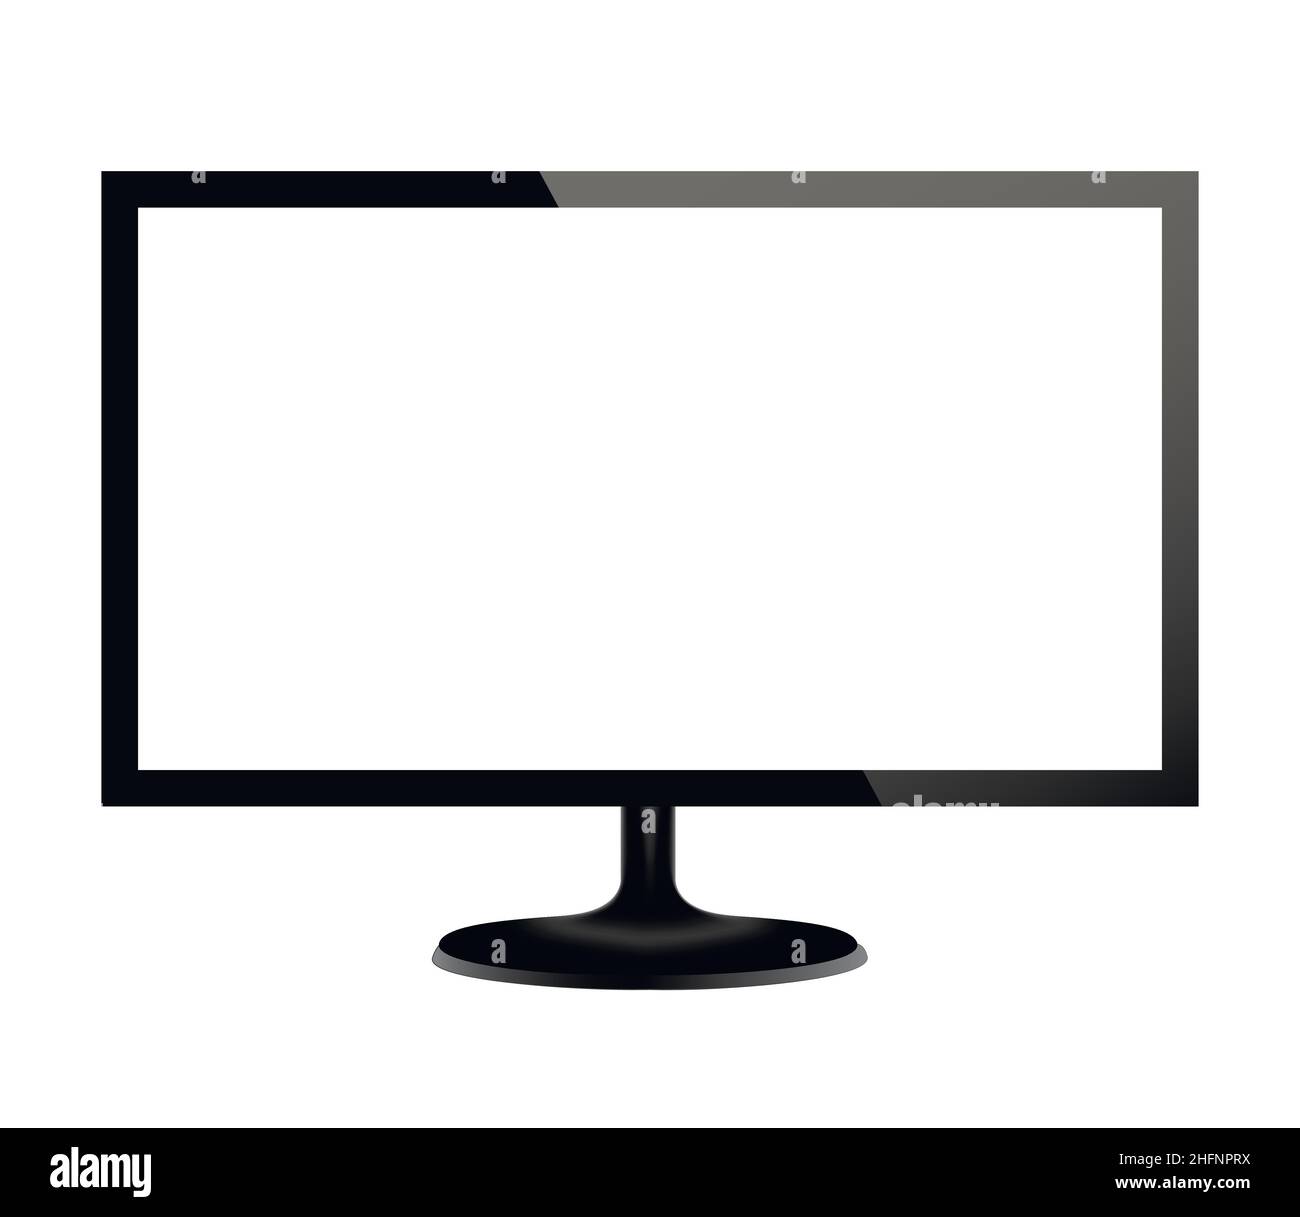 Black computer monitor on white background. Realistic vector illustration, for graphic and web design Stock Vector